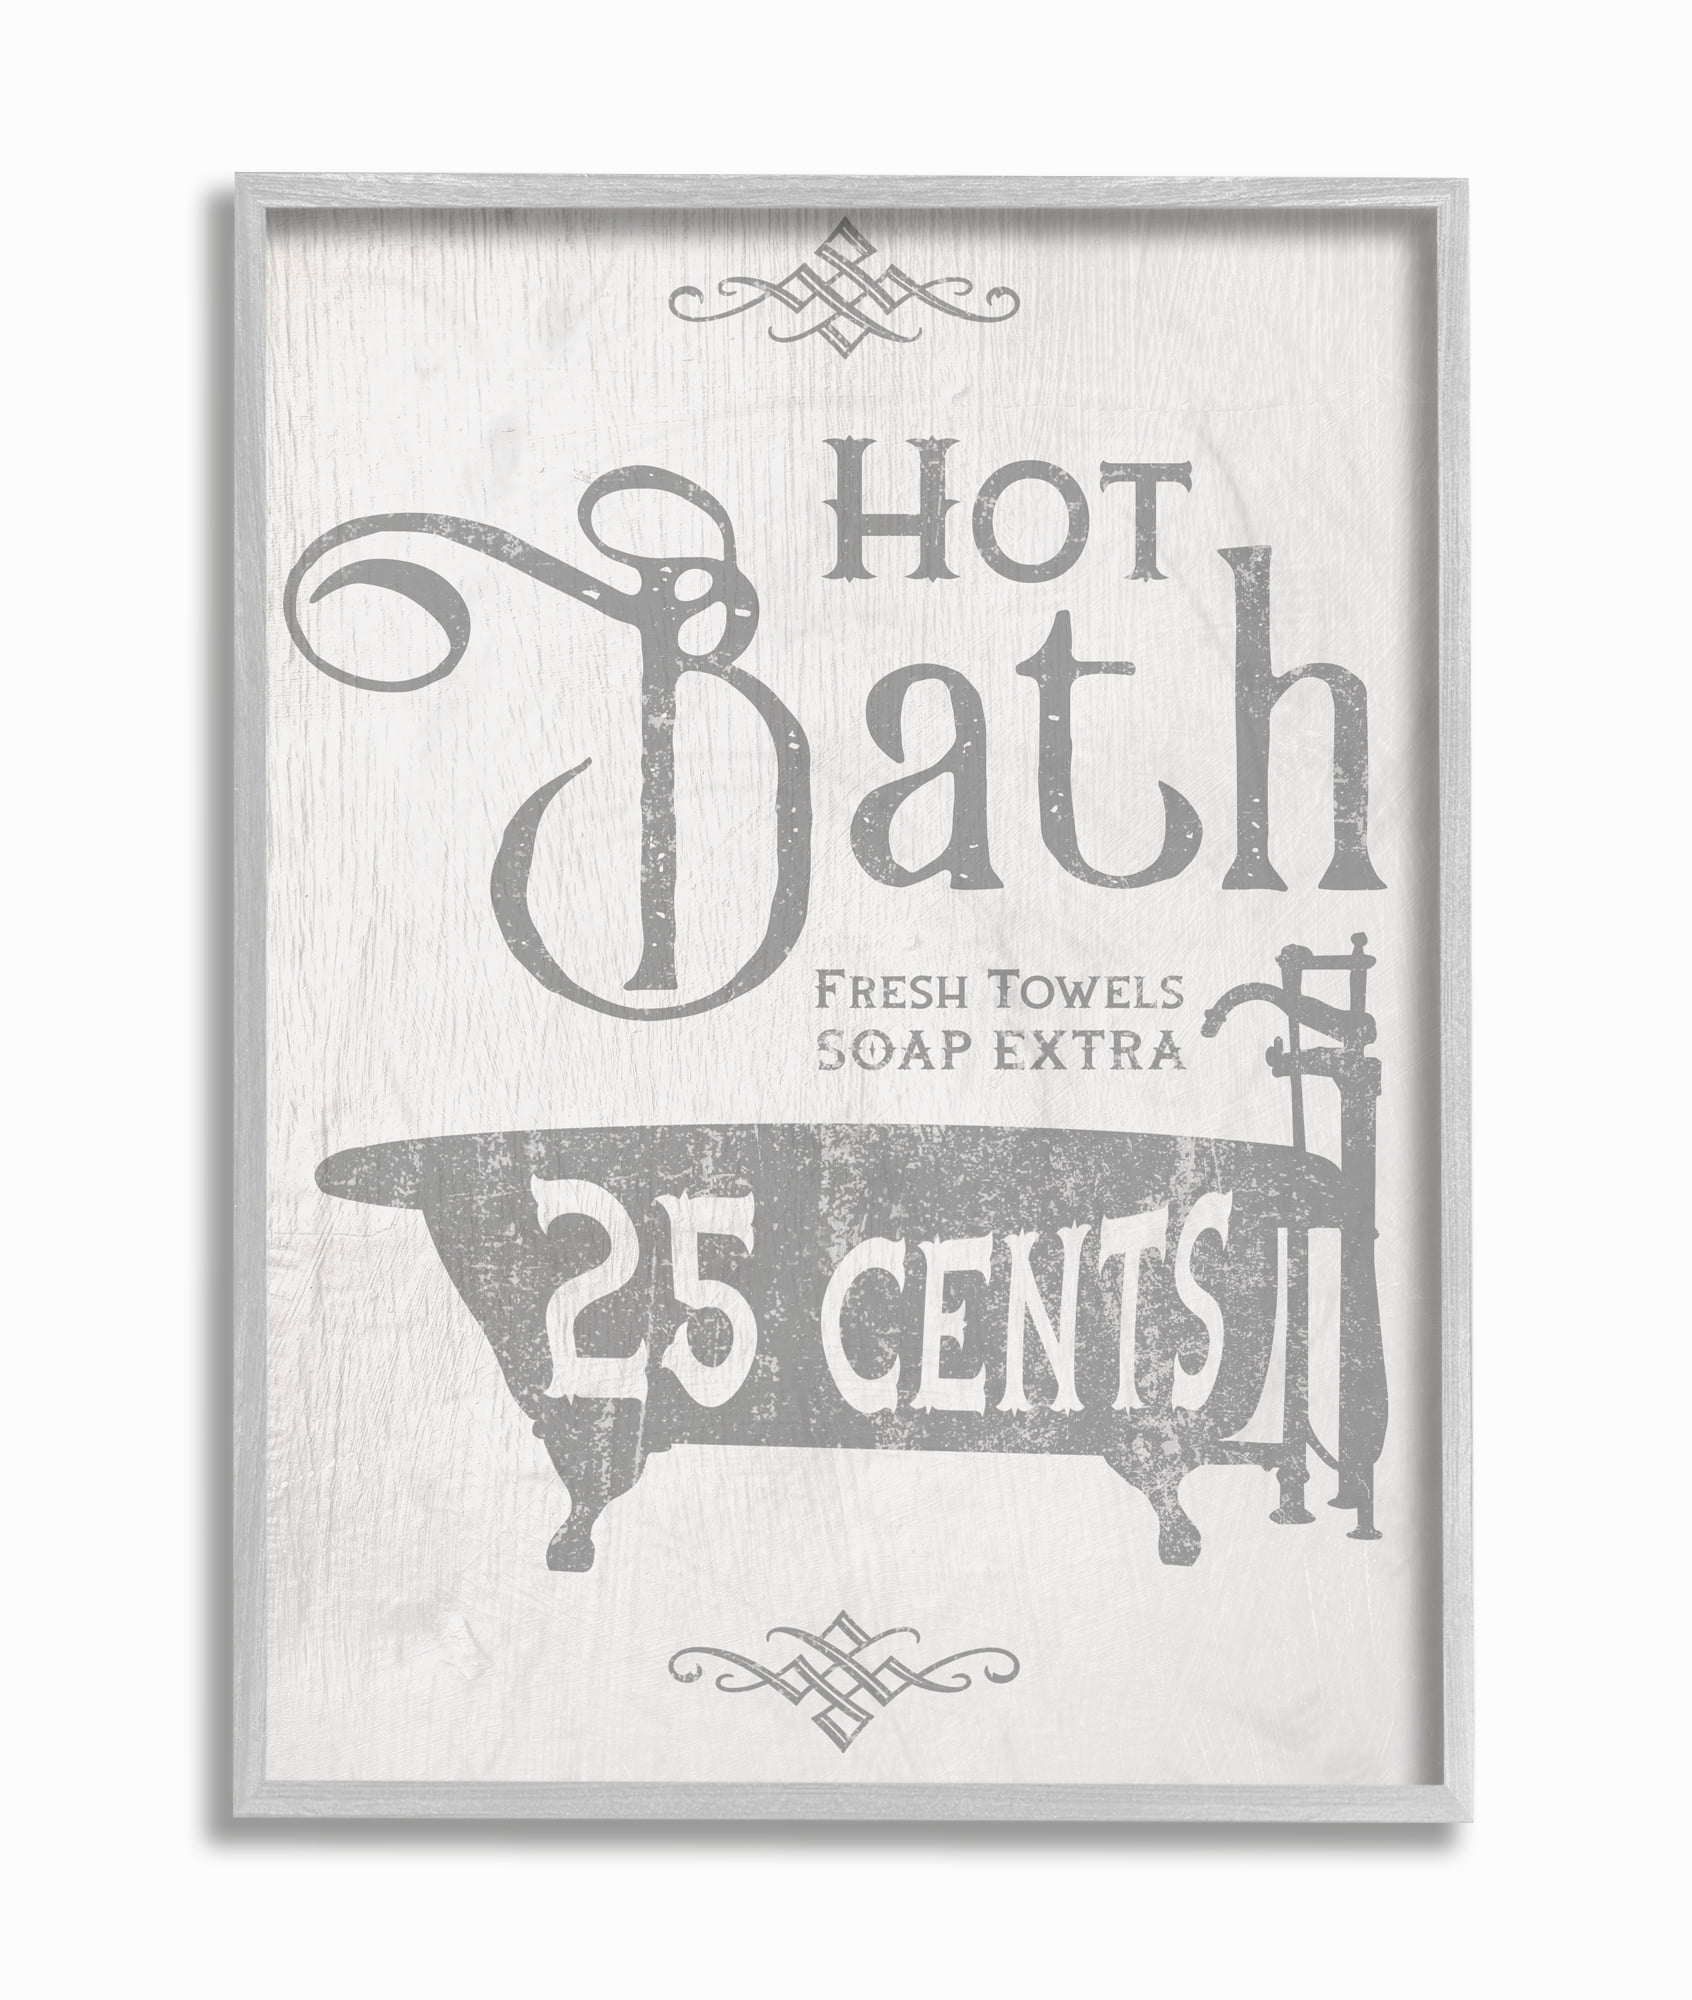 Hot Baths 25 cents soap and towel extra Sign Plaque Hook rustic brown finish 